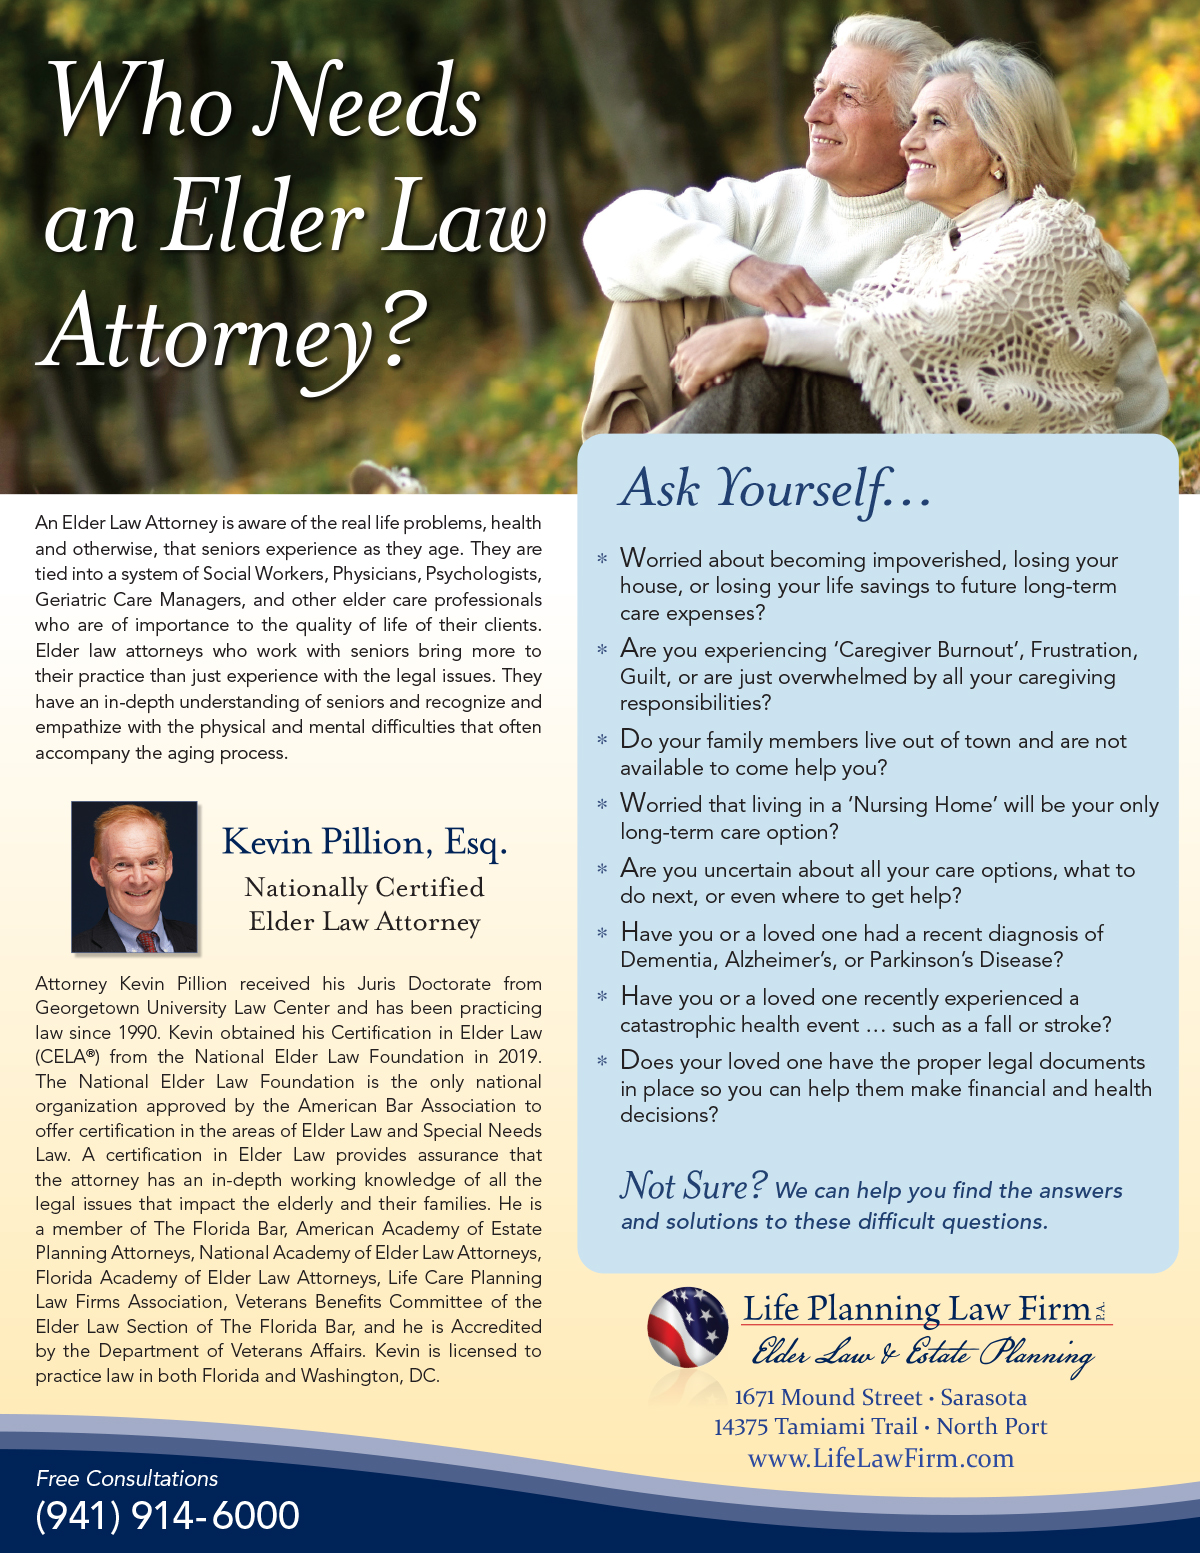 LPLF Who Needs an Elder Law Attorney_REV March 2015 - FINAL in-house